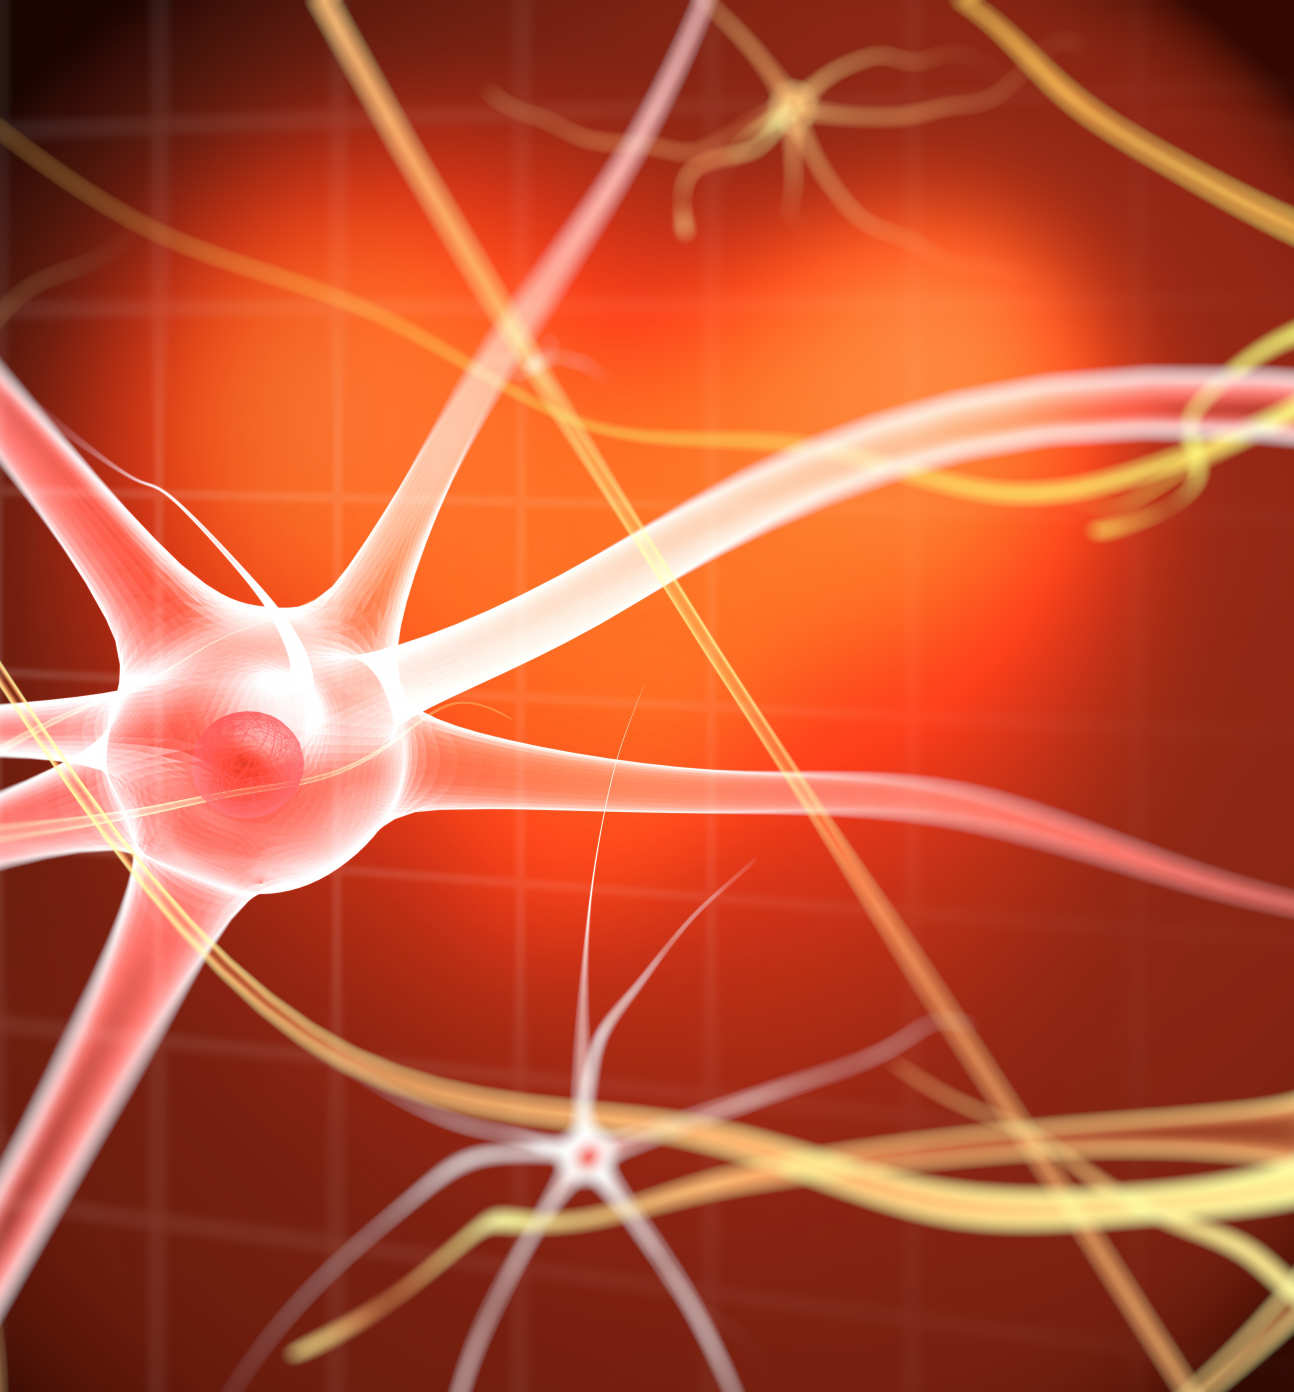 An illustration showing an inflamed nerve